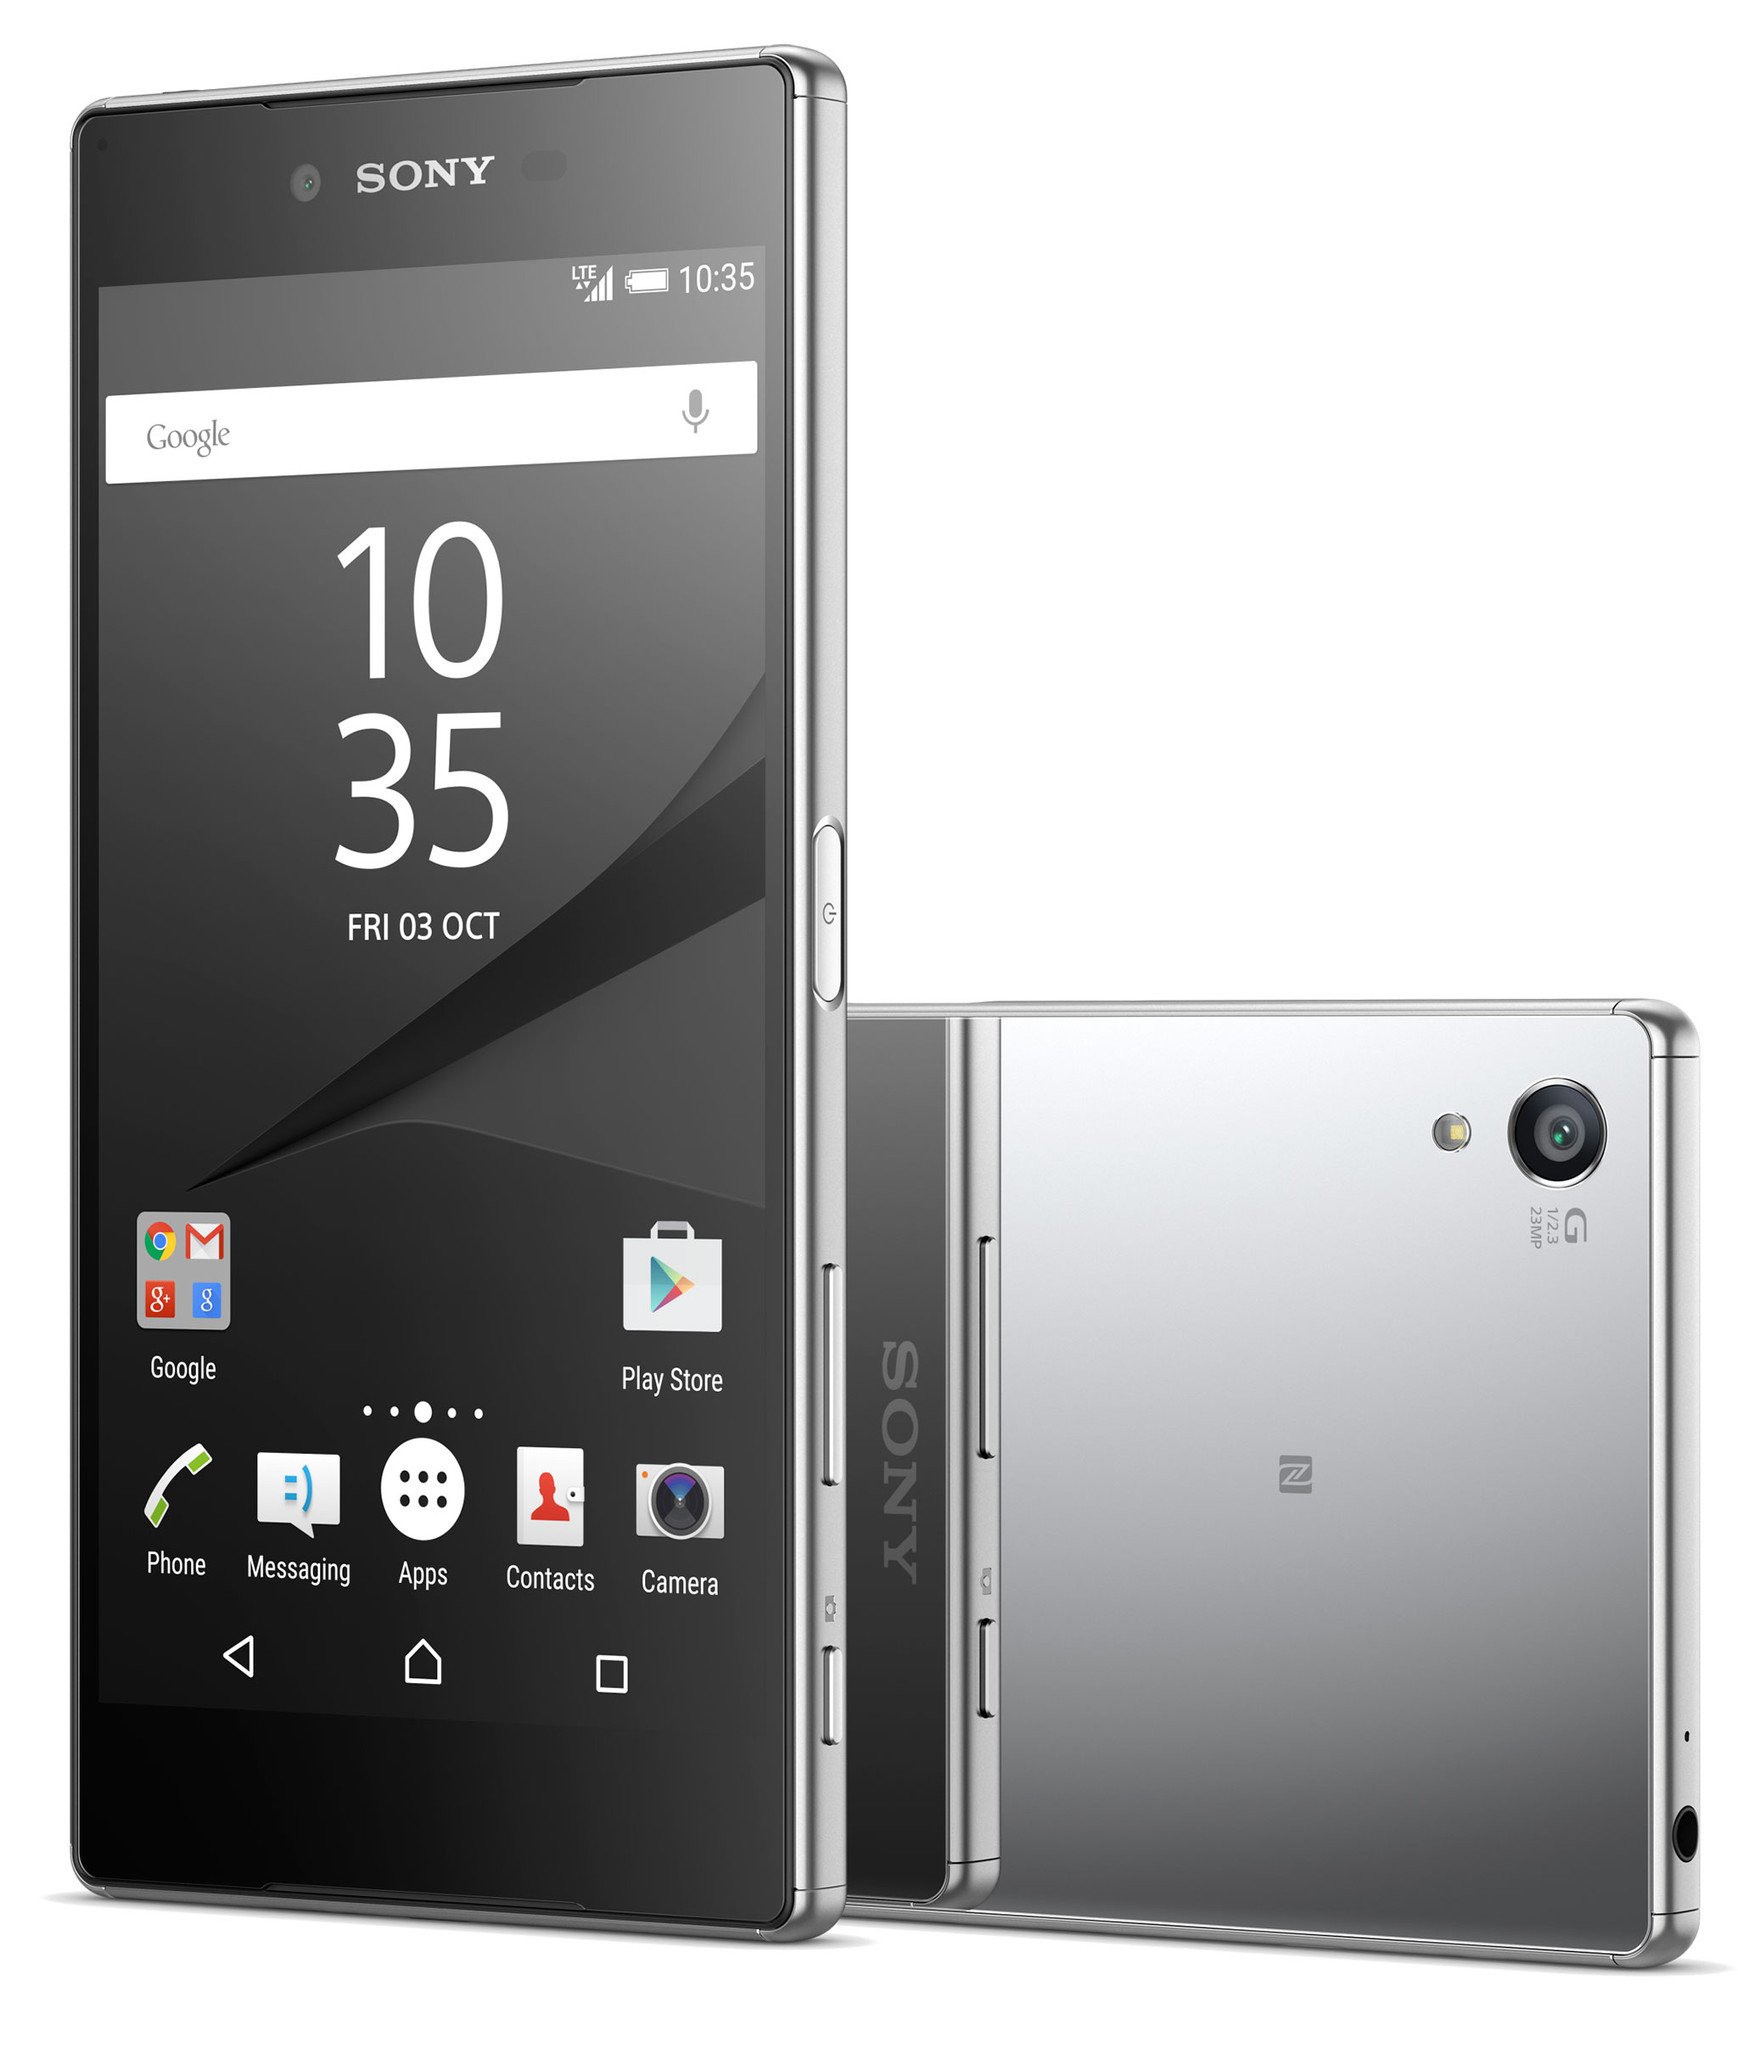 meisje kennisgeving Betrokken Sony Xperia Z5 Premium specs | Android Central